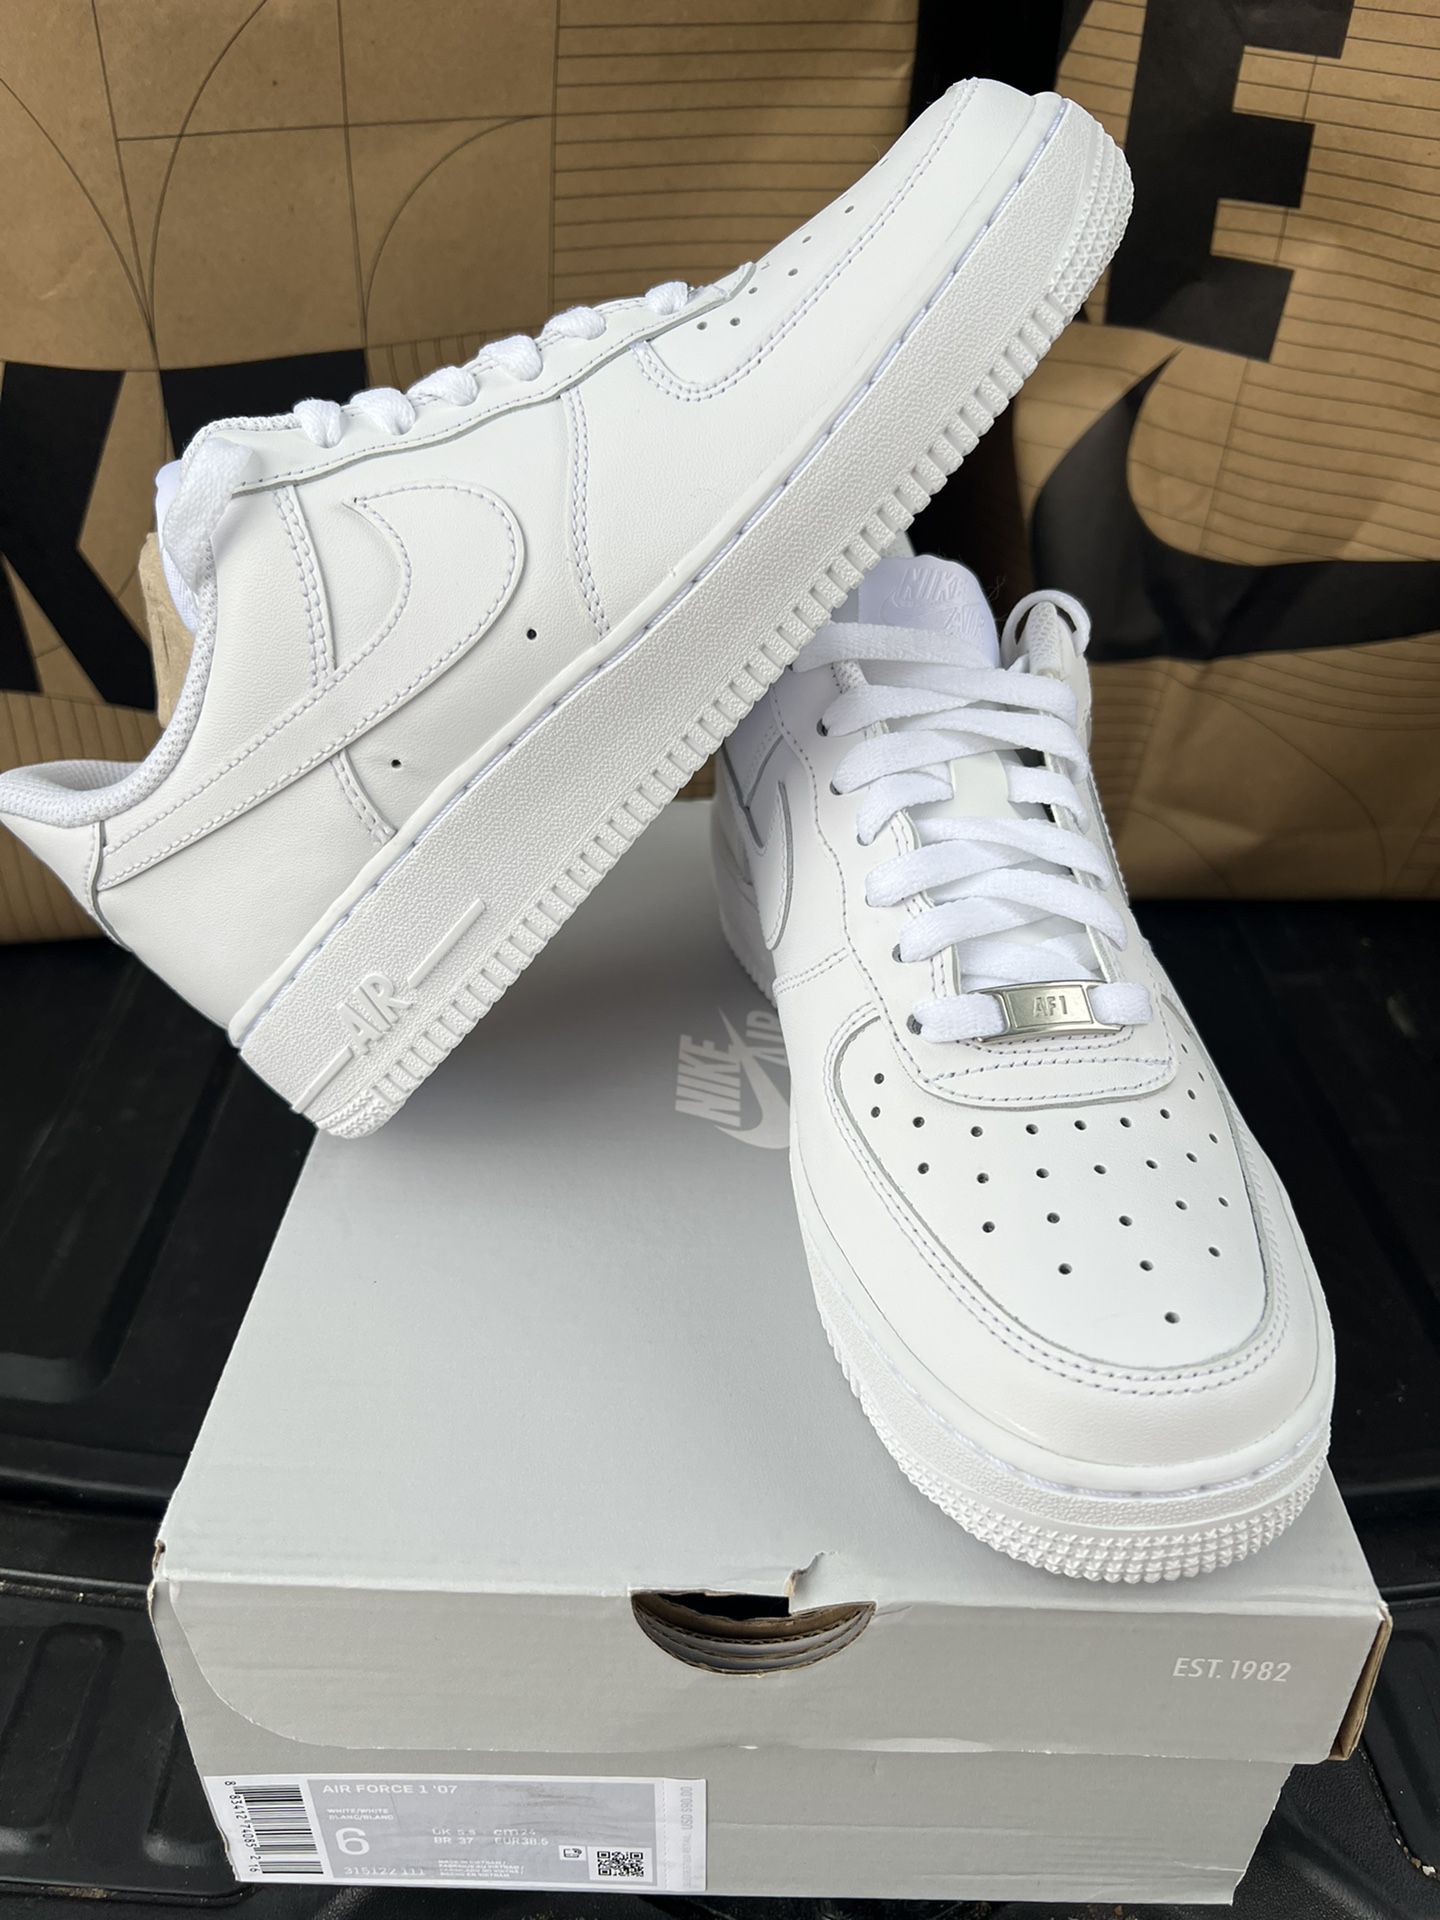 Nike Air Force 1 White/Blue Whisper for Sale in The Bronx, NY - OfferUp